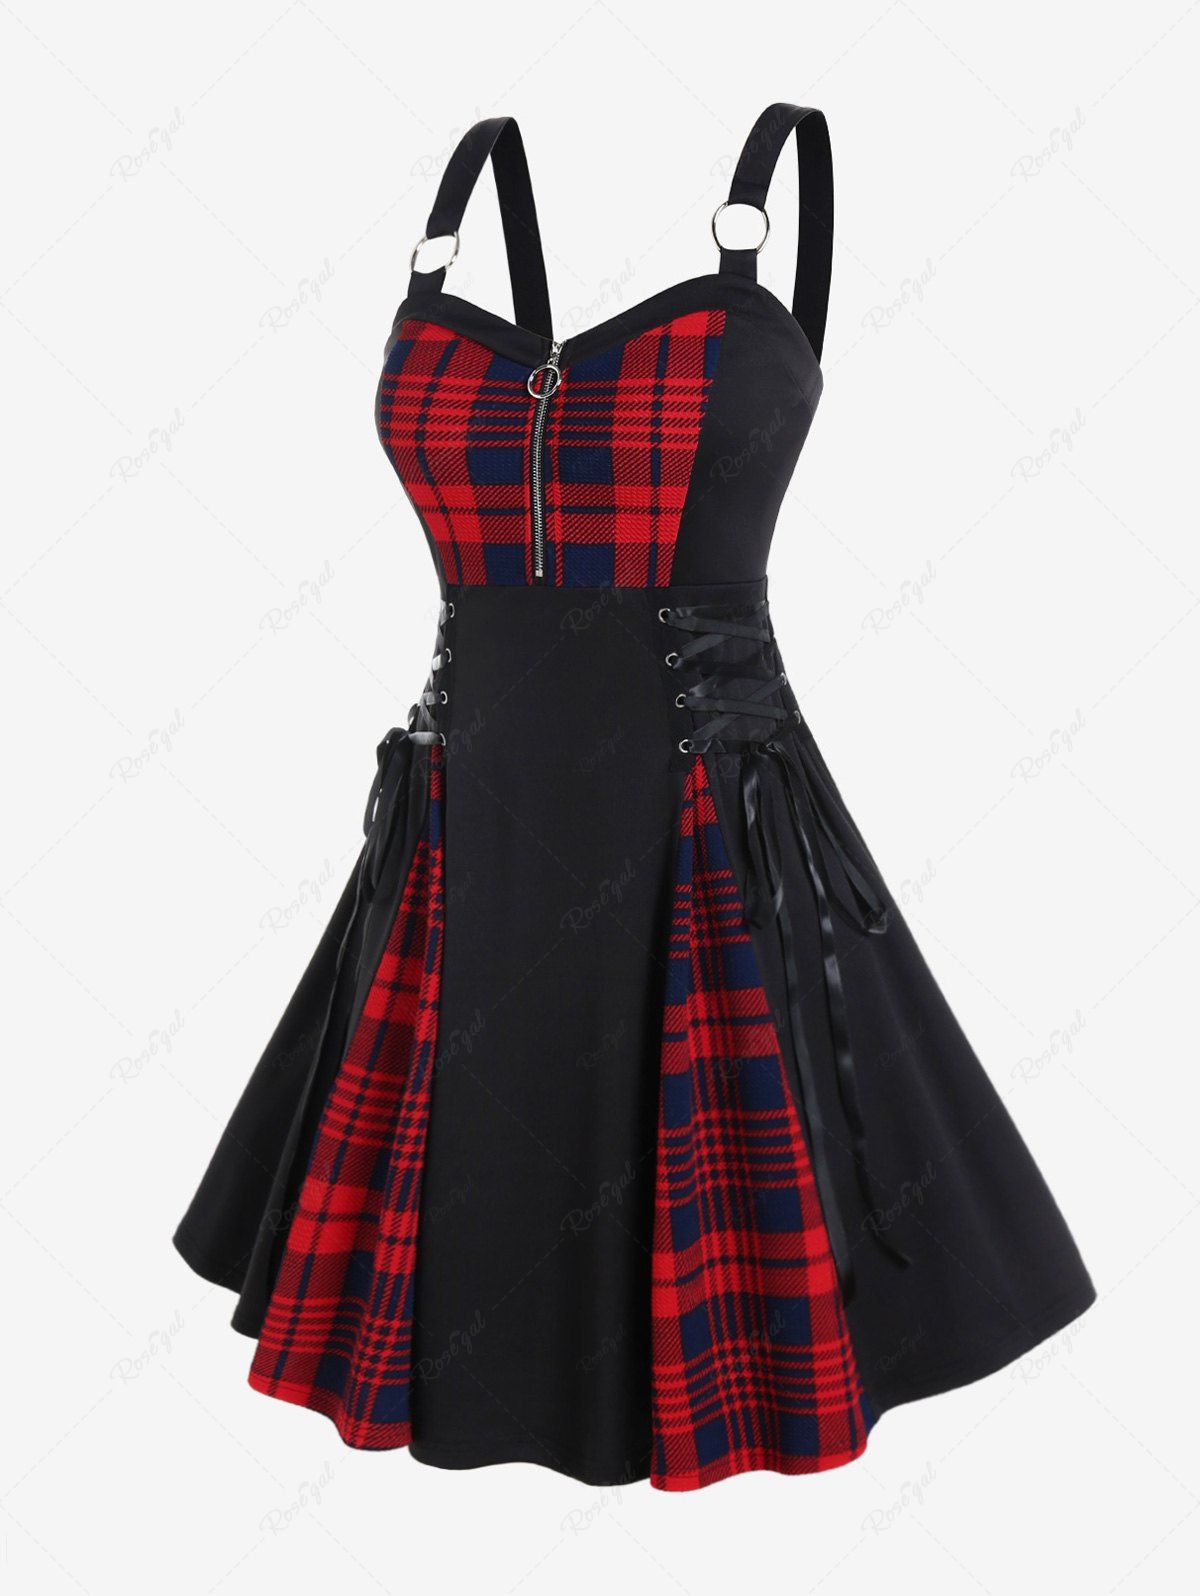 New Lace Up Plaid Half Zipper Fit and Flare Gothic Dress  